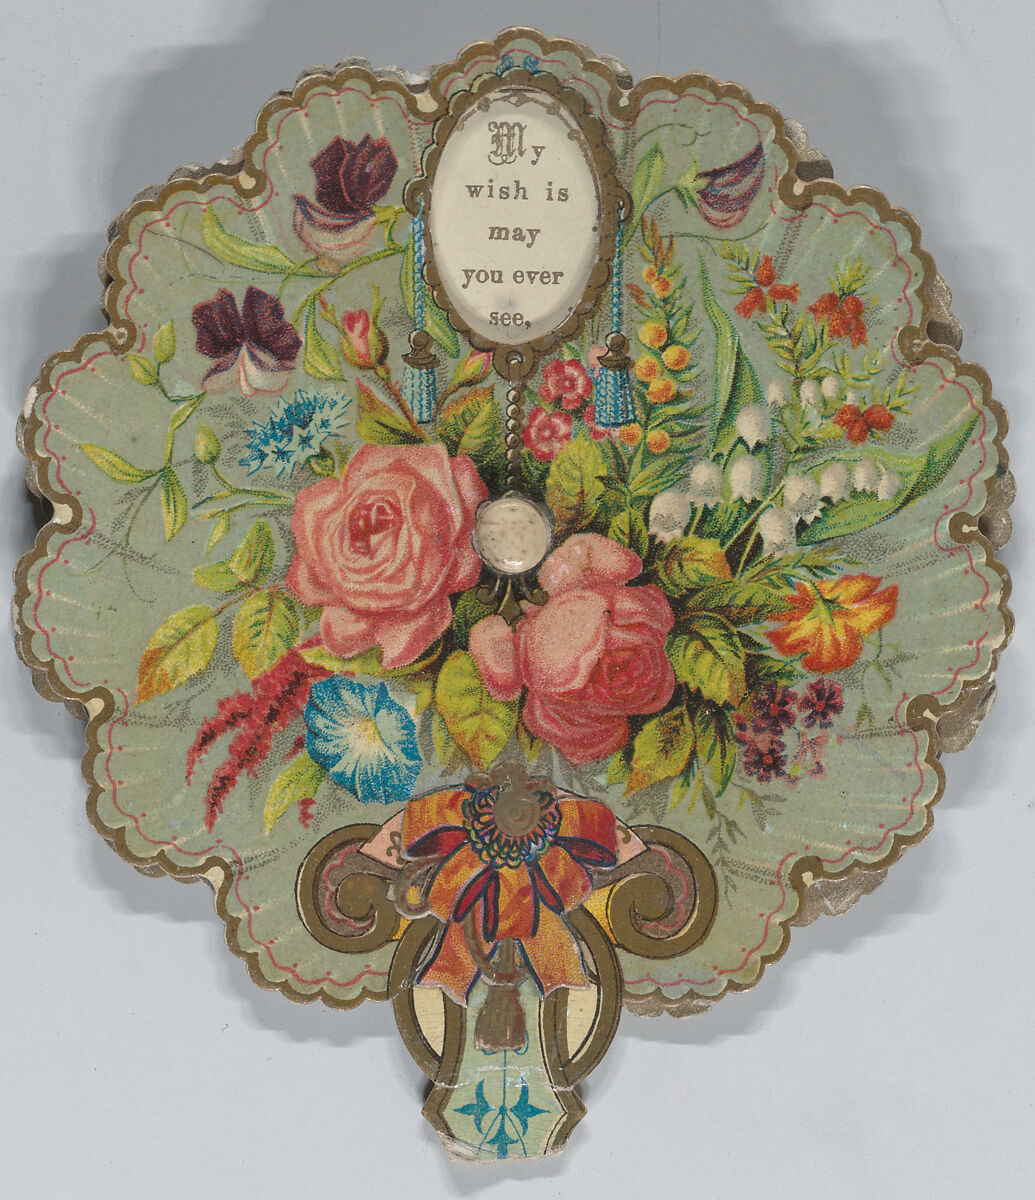 Valentine - Mechanical - Round Birthday bouquet, Anonymous, British or American, 19th century, Heavy die-cut card stock, chromolithography, celluloid grommet 